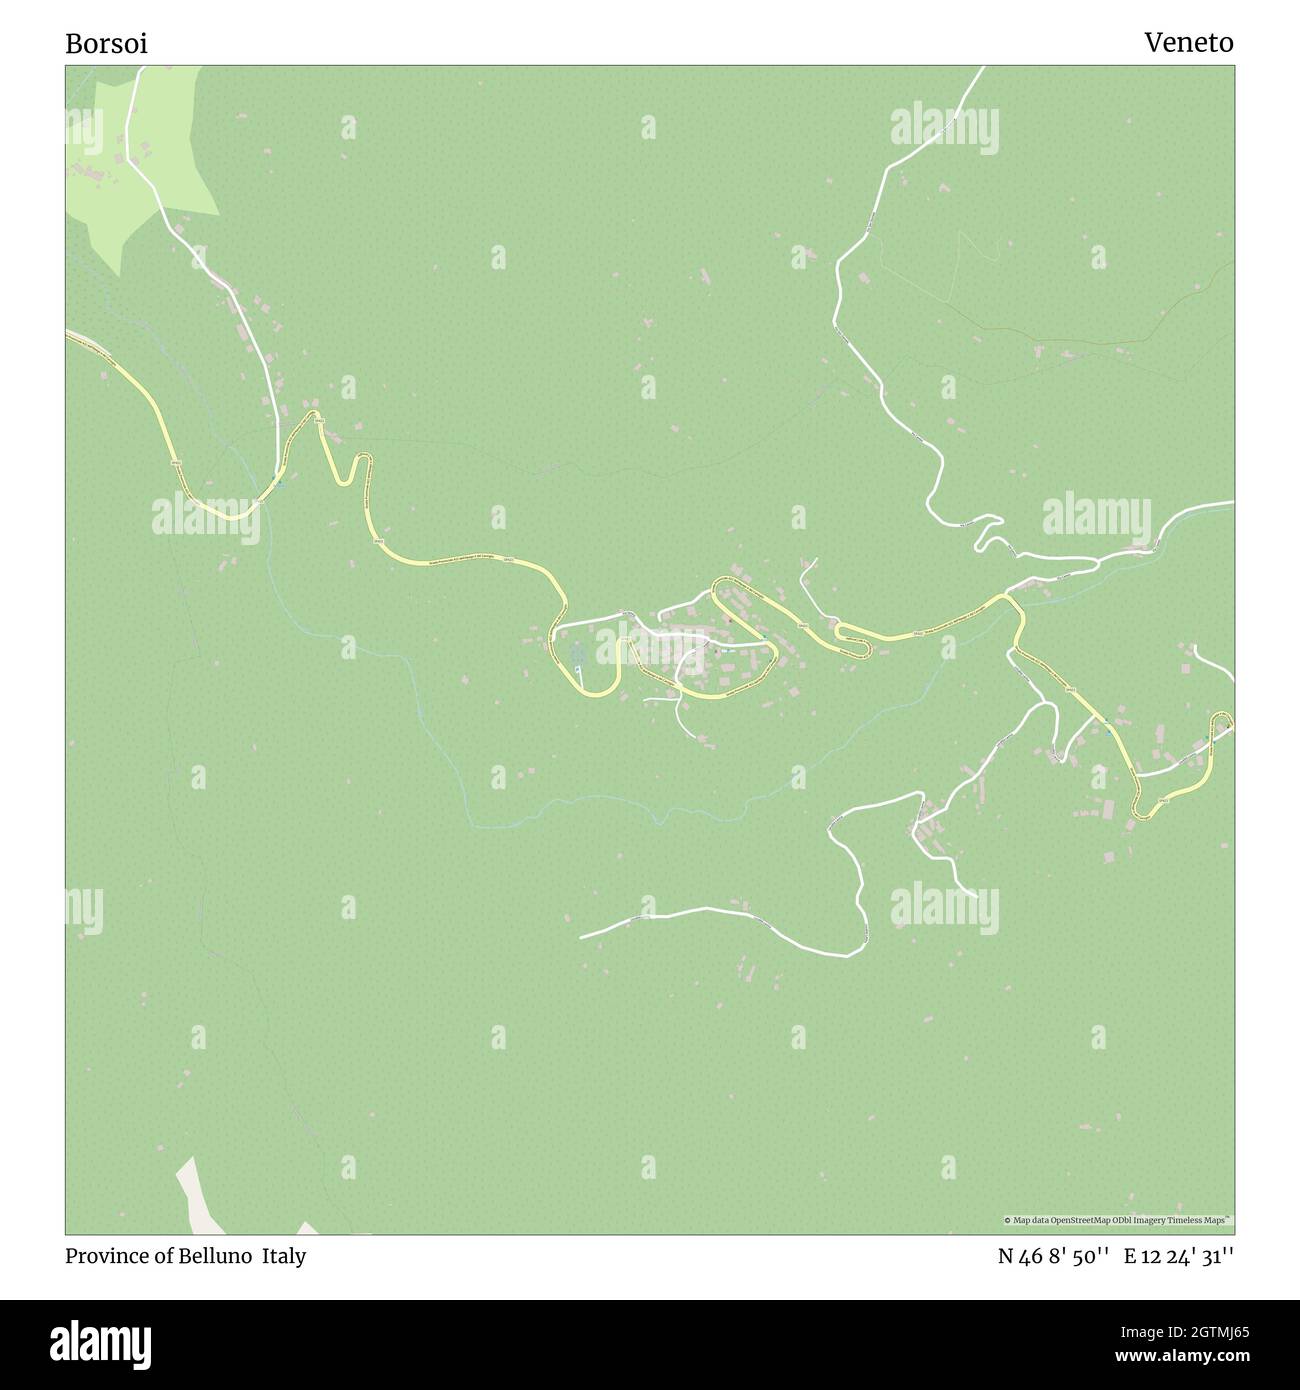 Borsoi, Province of Belluno, Italy, Veneto, N 46 8' 50'', E 12 24' 31'', map, Timeless Map published in 2021. Travelers, explorers and adventurers like Florence Nightingale, David Livingstone, Ernest Shackleton, Lewis and Clark and Sherlock Holmes relied on maps to plan travels to the world's most remote corners, Timeless Maps is mapping most locations on the globe, showing the achievement of great dreams Stock Photo